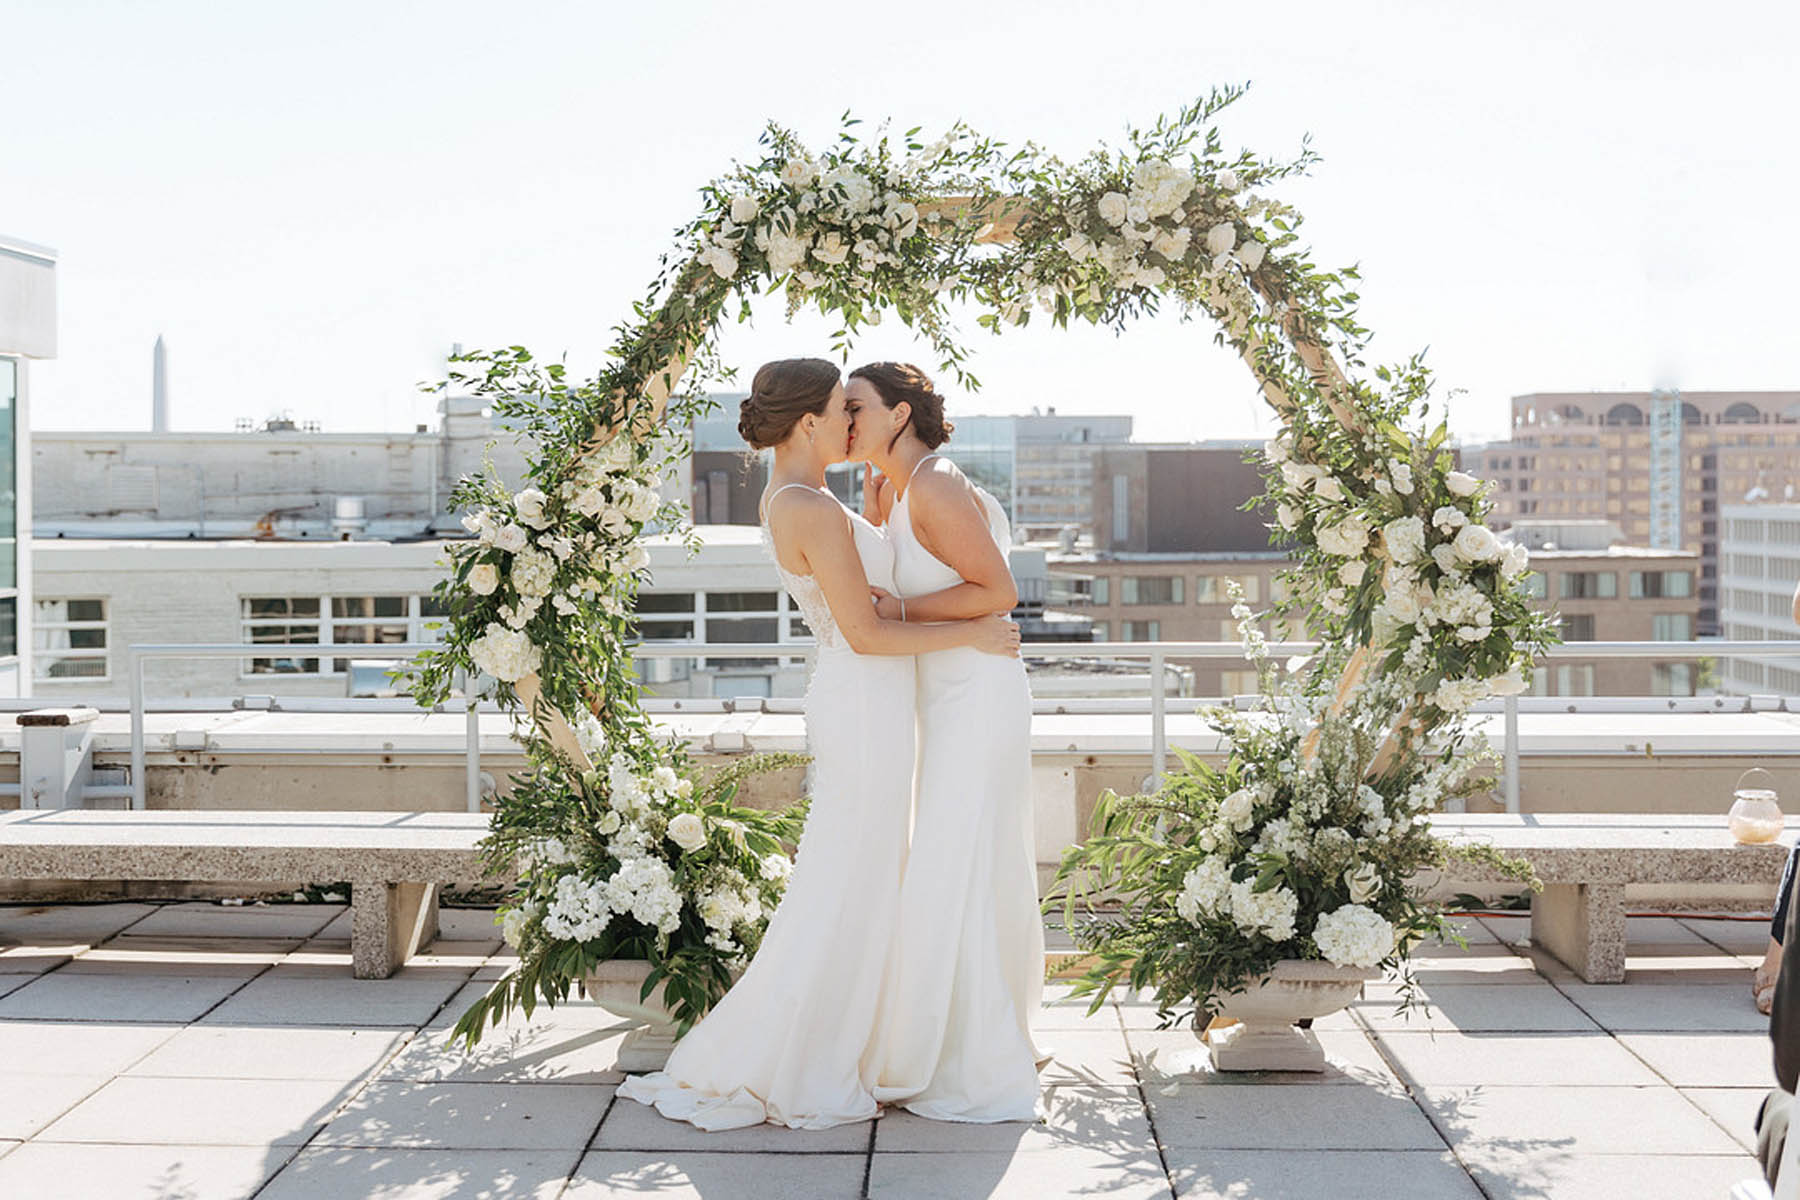 LGBTQ+ wedding inspiration: celebrating queer love with a rooftop